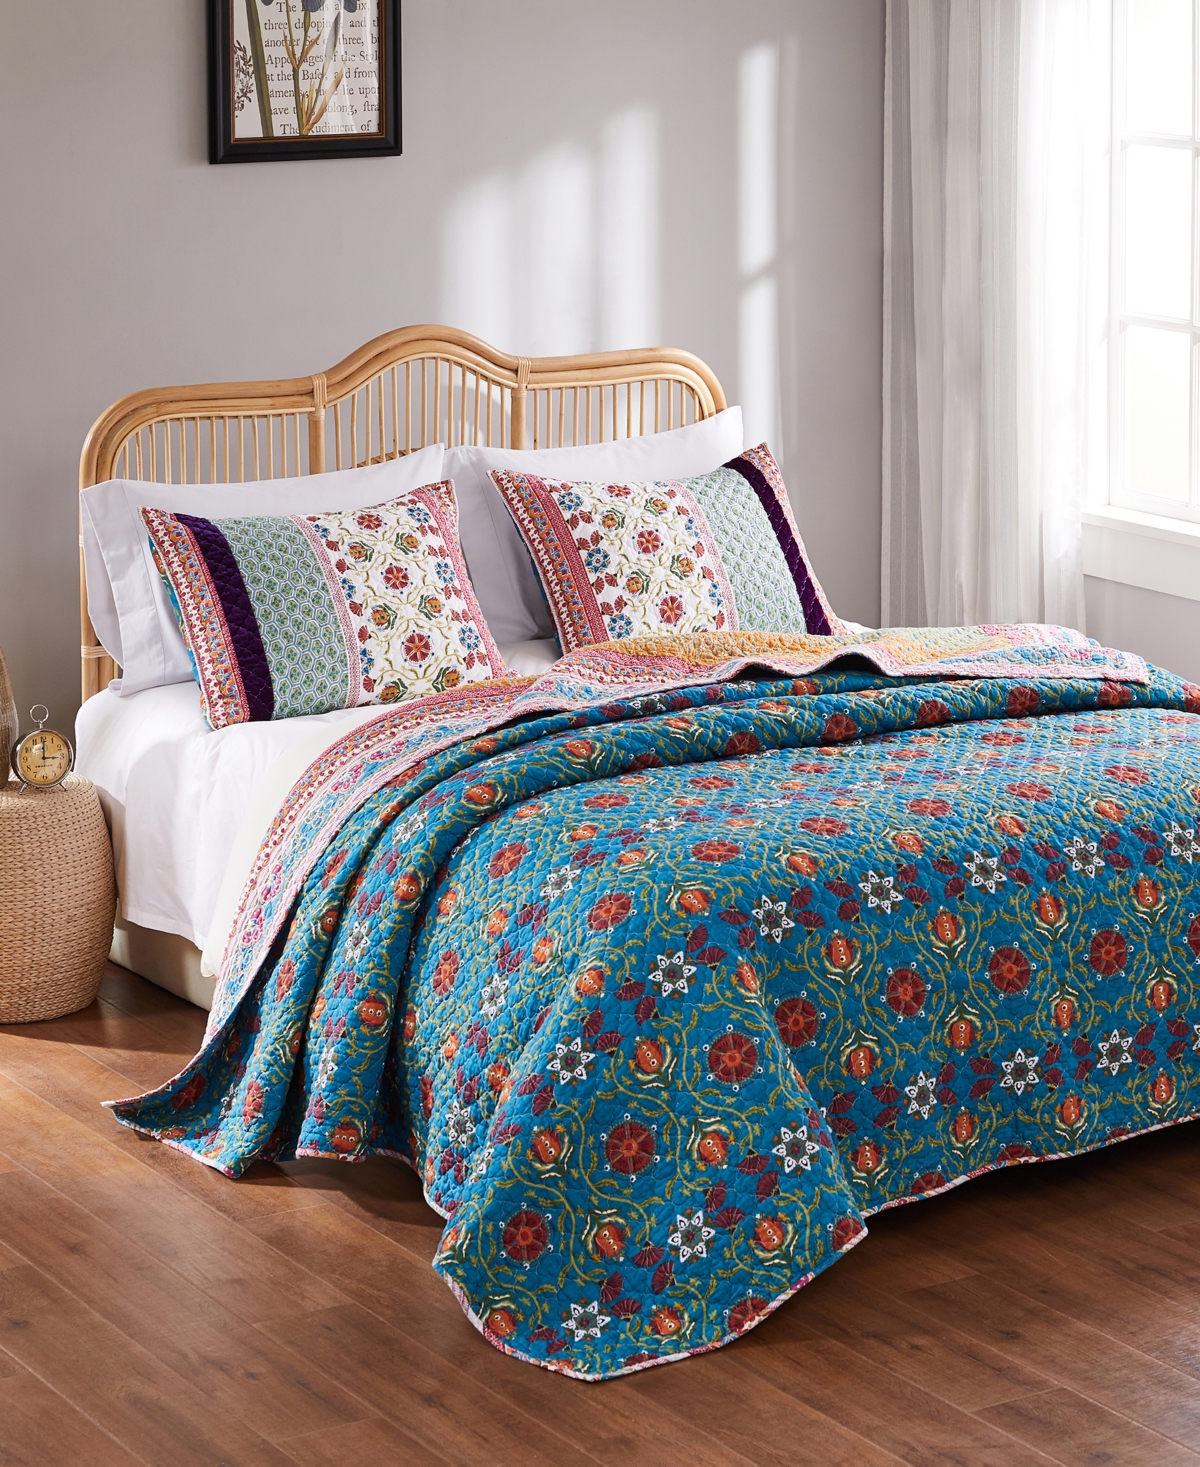 Shop Greenland Home Fashions Thalia Cotton Reversible 4 Piece Quilt Set, Twin/twin Xl In Multi